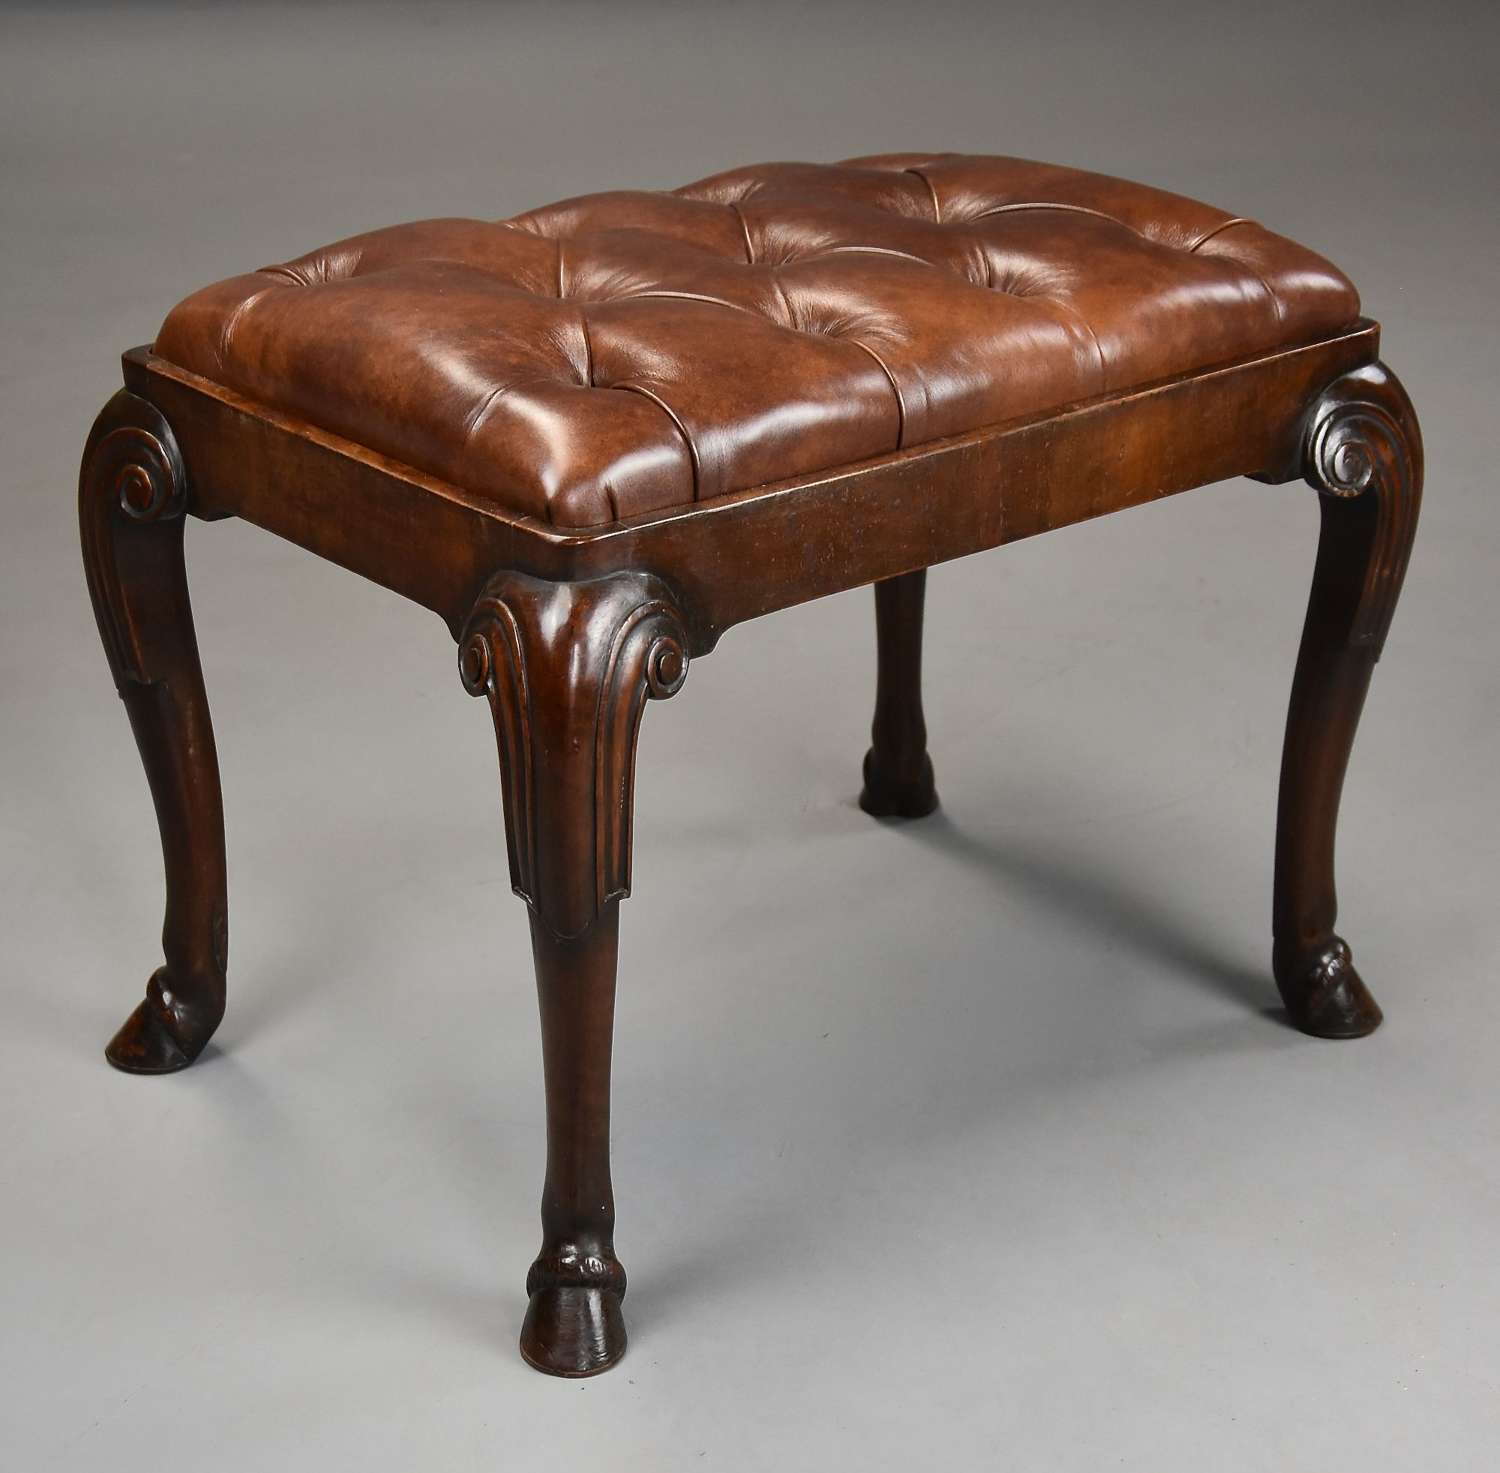 Late 19thc walnut cabriole leg stool in the Queen Anne style